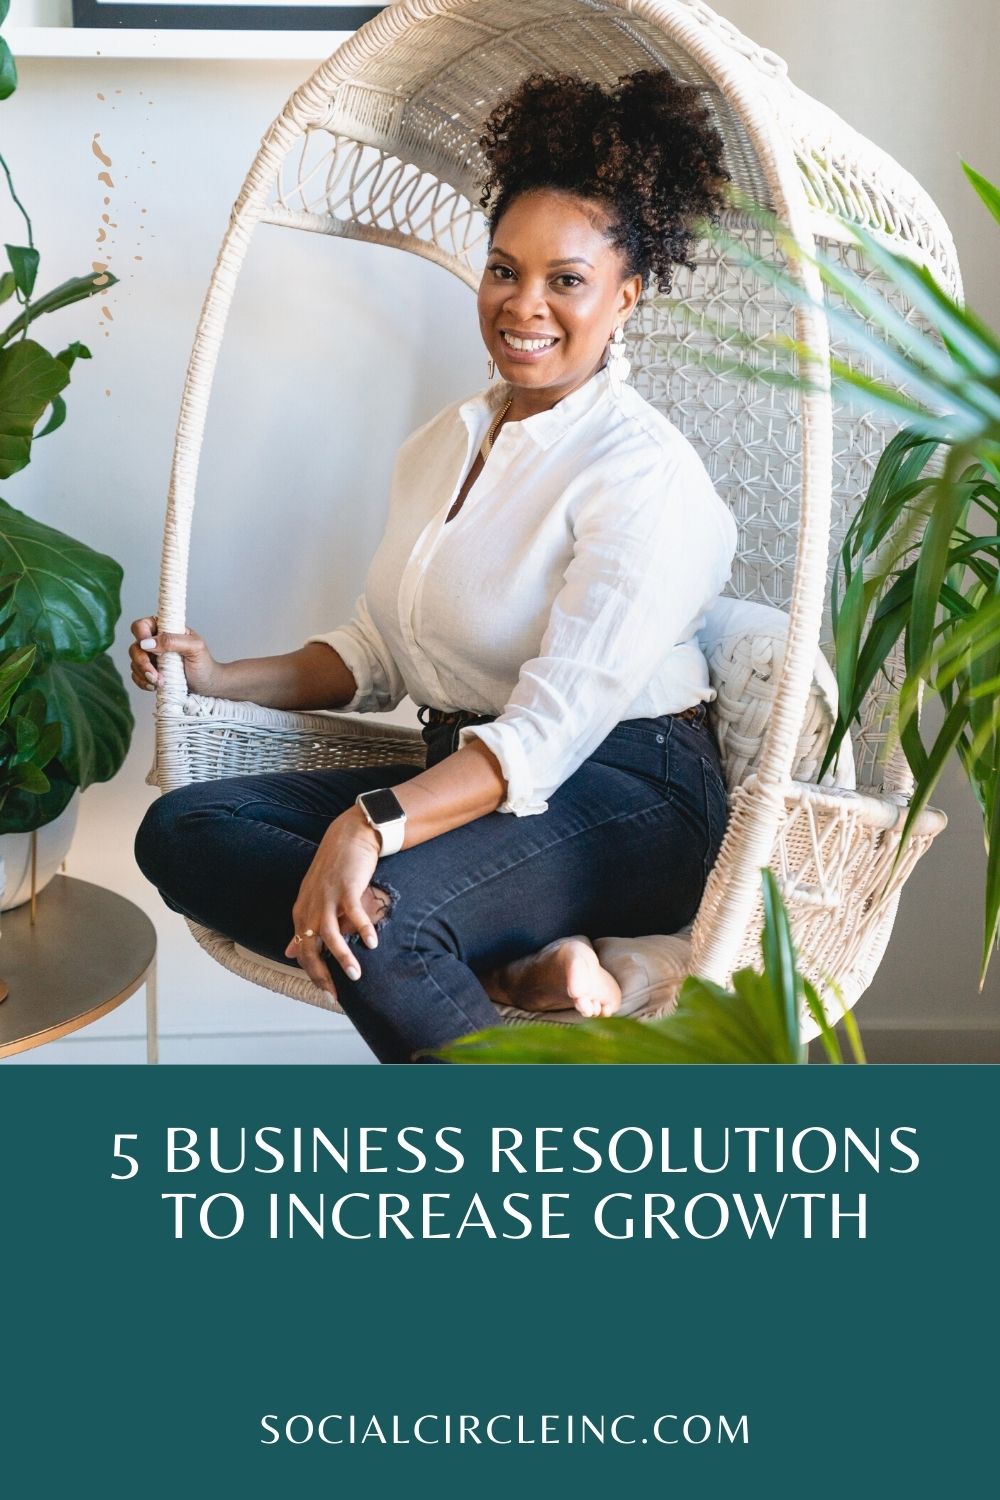 5 Business Resolutions to Increase Growth